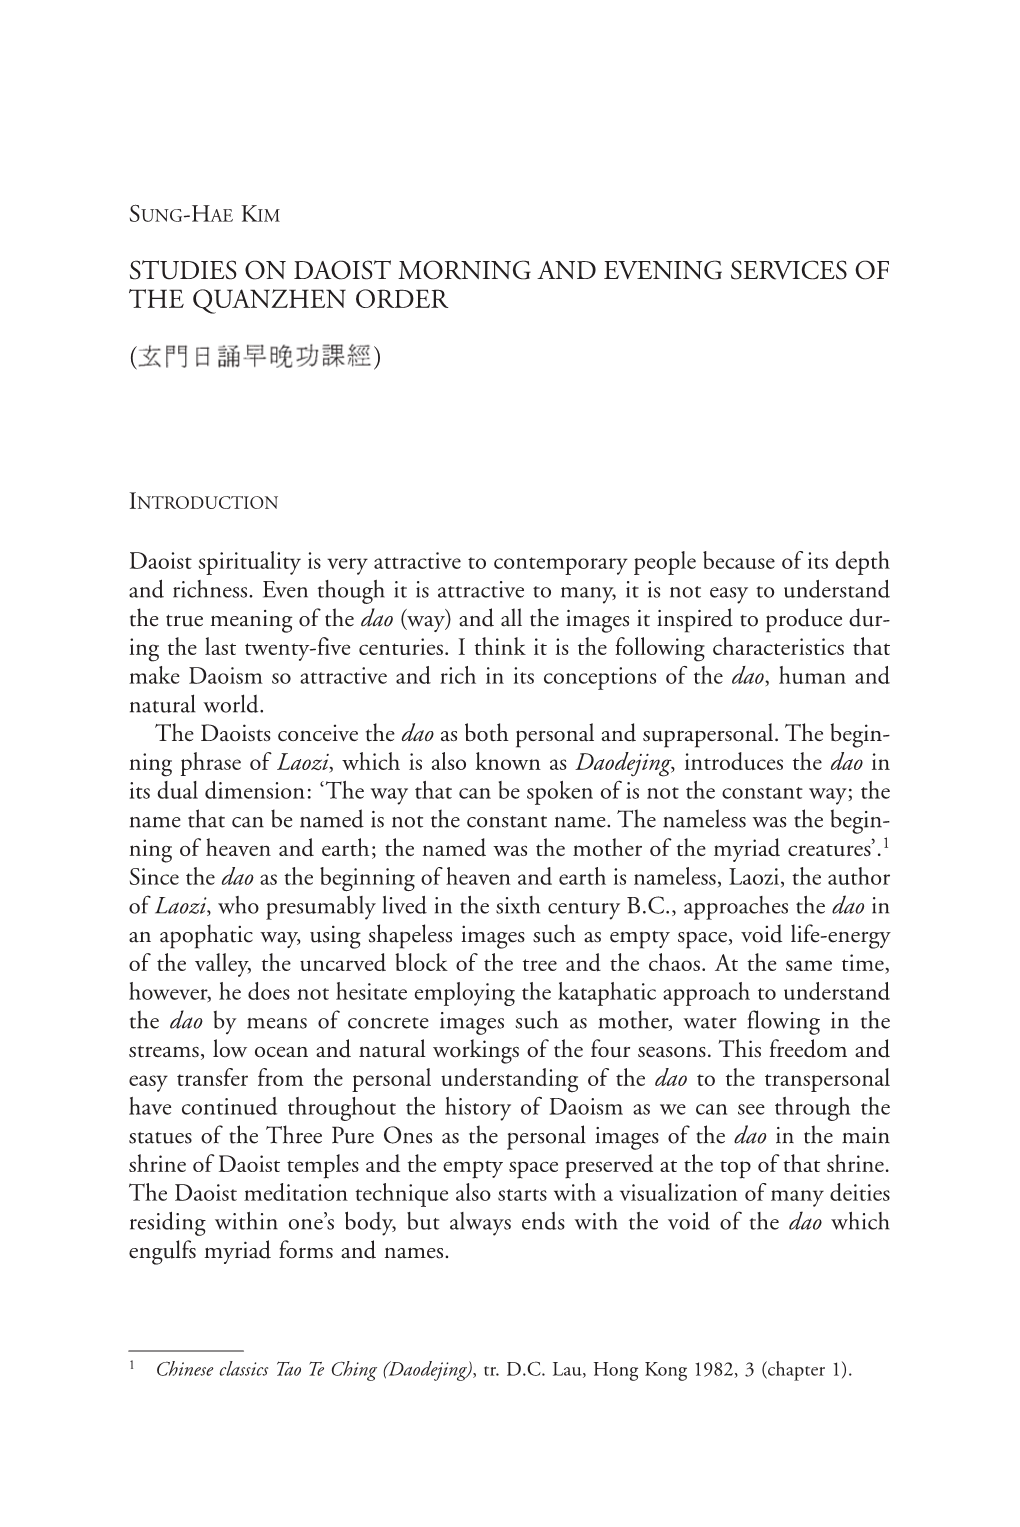 Studies on Daoist Morning and Evening Services of the Quanzhen Order